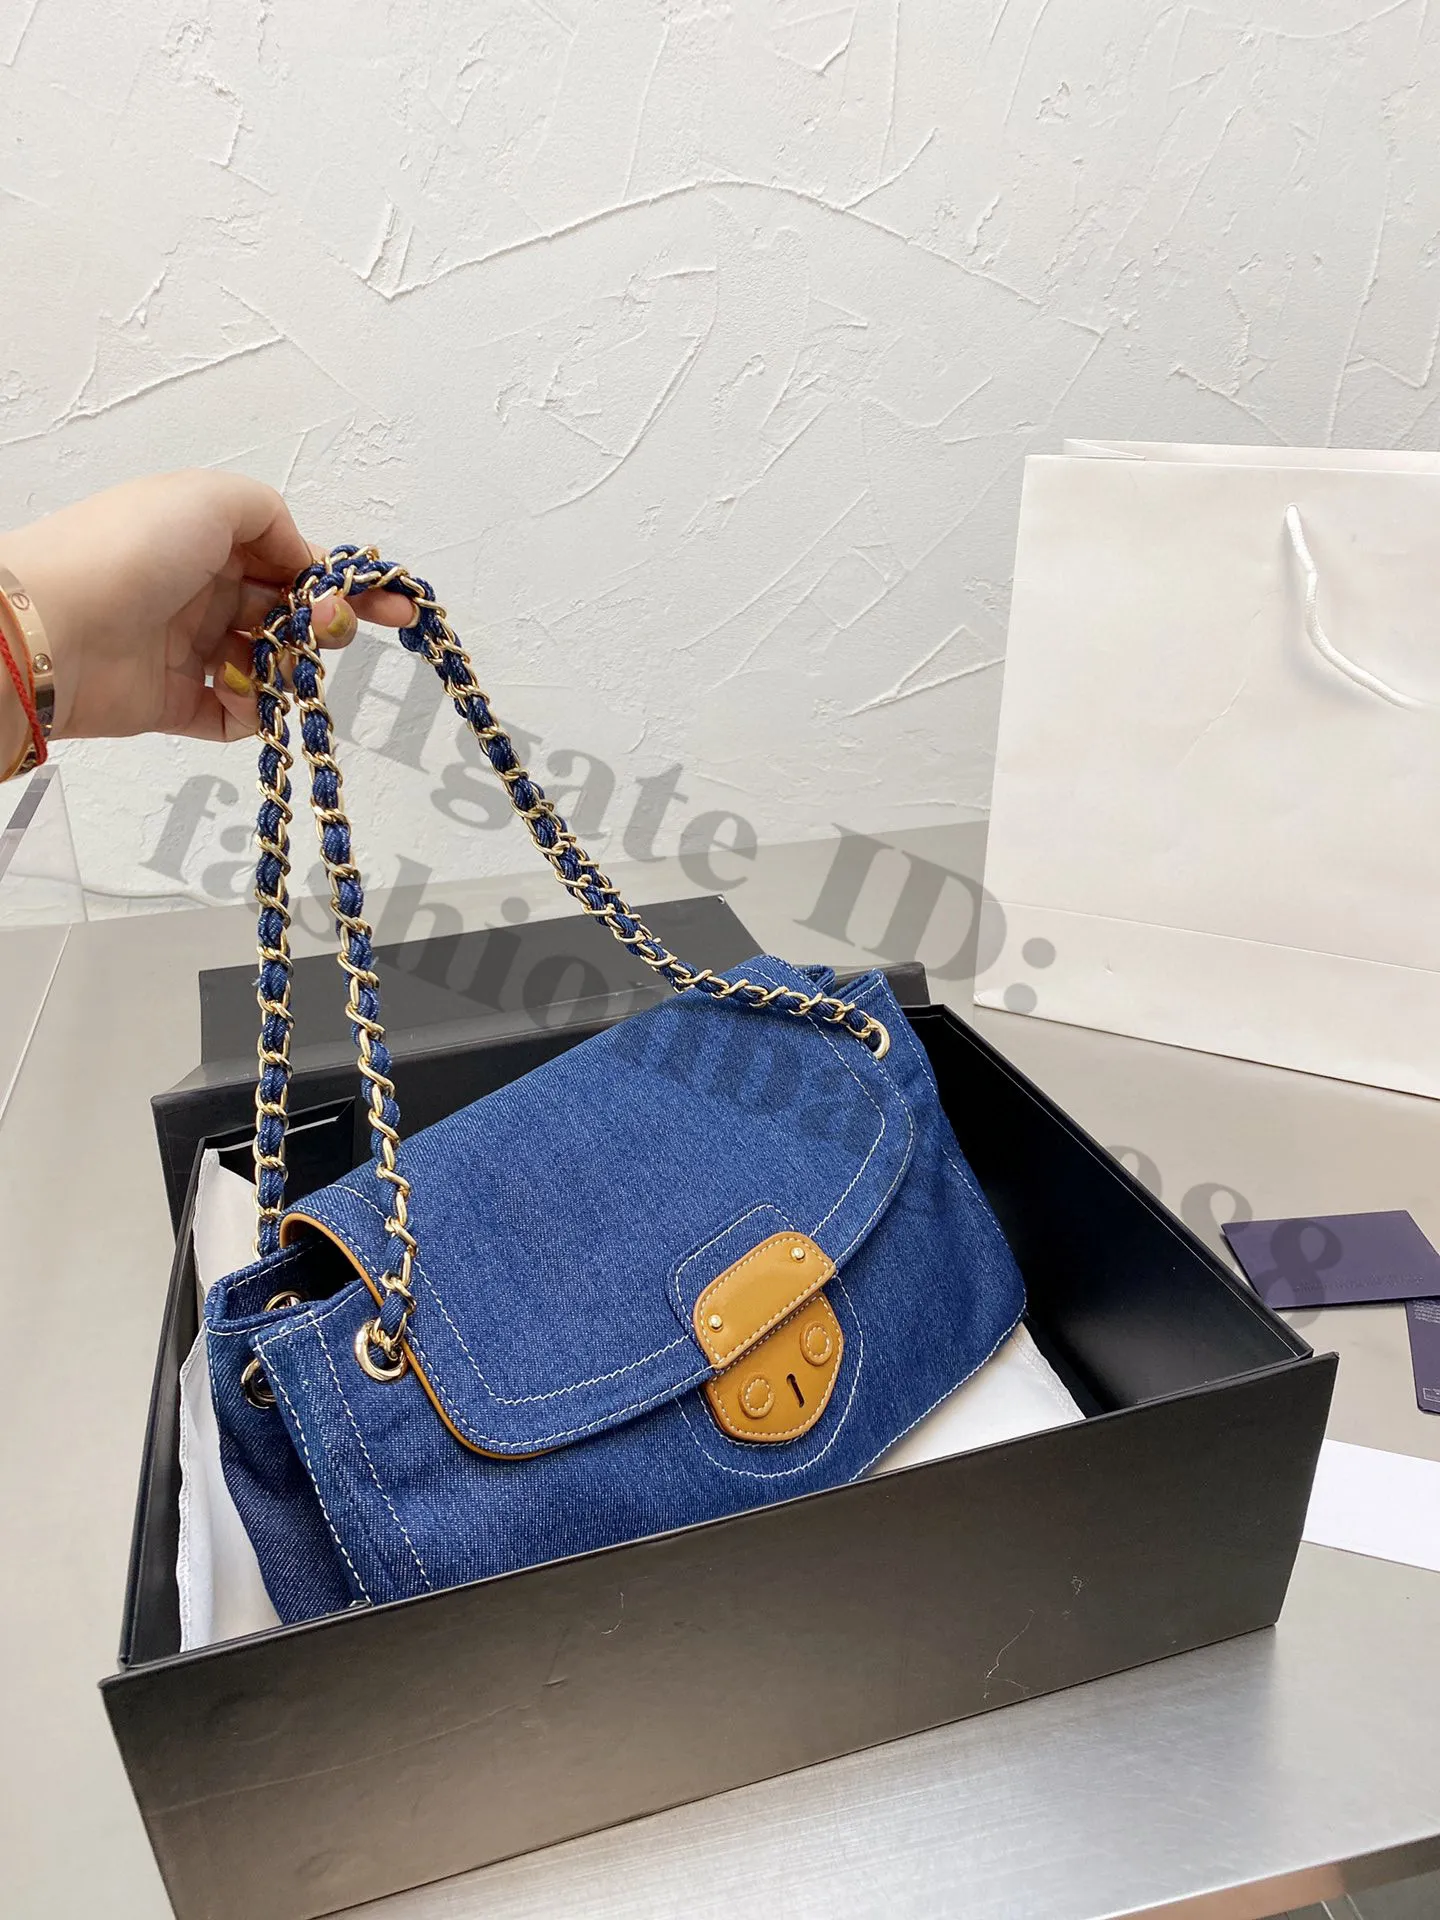 Women Chains One Armpit Shoulder Bags Denim Blue Flap Small Casual Daily Life Handbags Fashion Brand Party Festival New 2021 Famous Design Crossbody Side Hand Bag